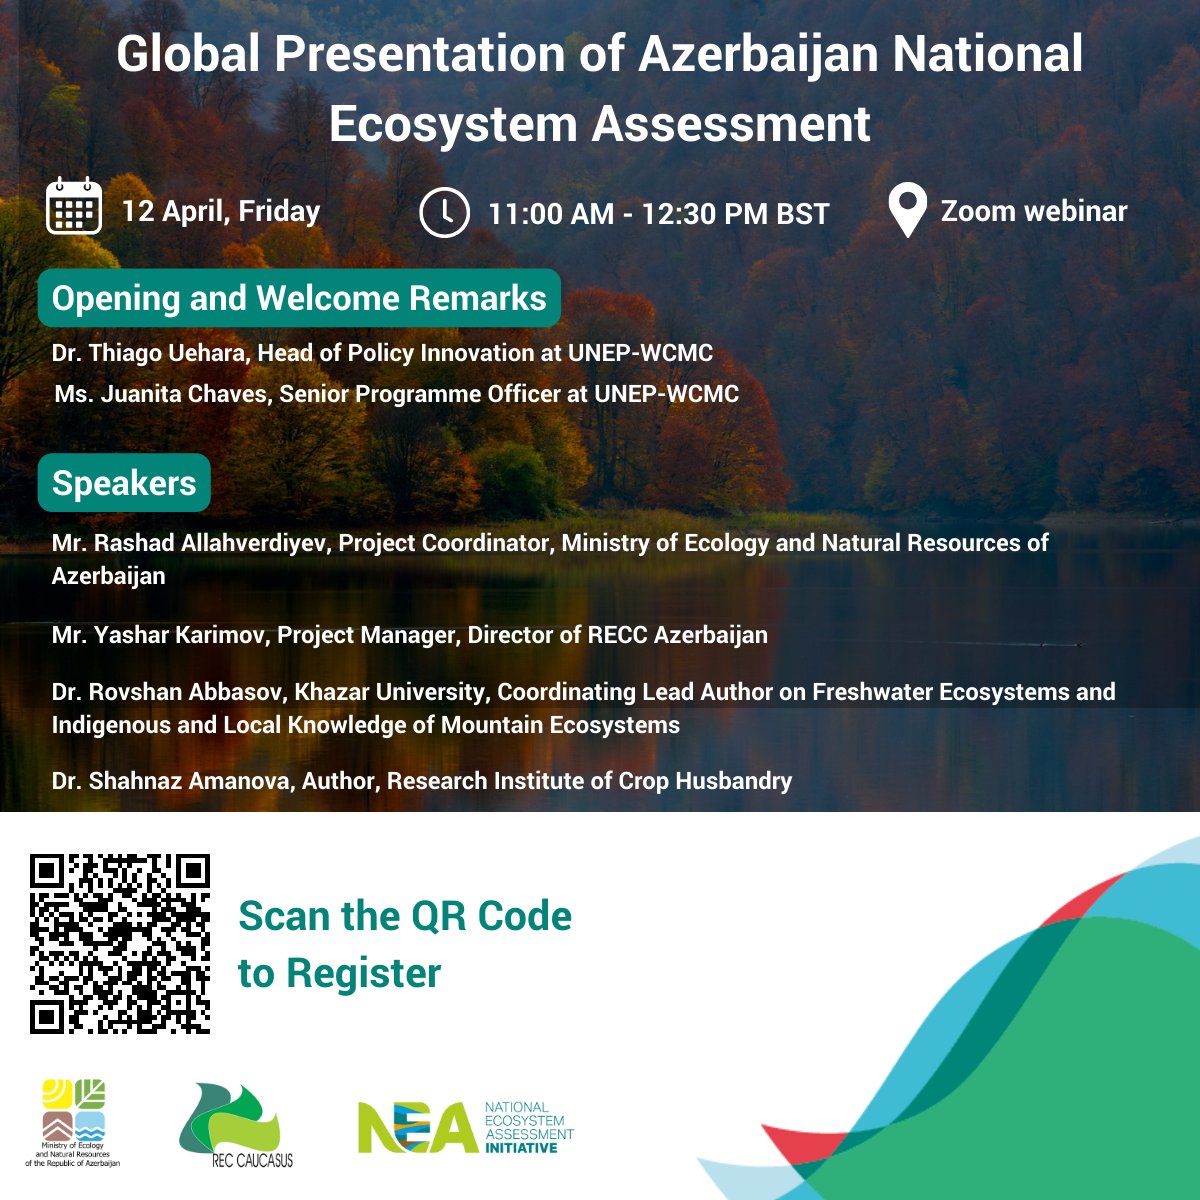 📢Join us tomorrow! UNEP-WCMC's National Ecosystem Assessment (NEA) Initiative will be conducting an online webinar to present main findings, lessons learned & challenges faced during the national ecosystem assessment process in Azerbaijan. Sign up: eu1.hubs.ly/H08xmk50